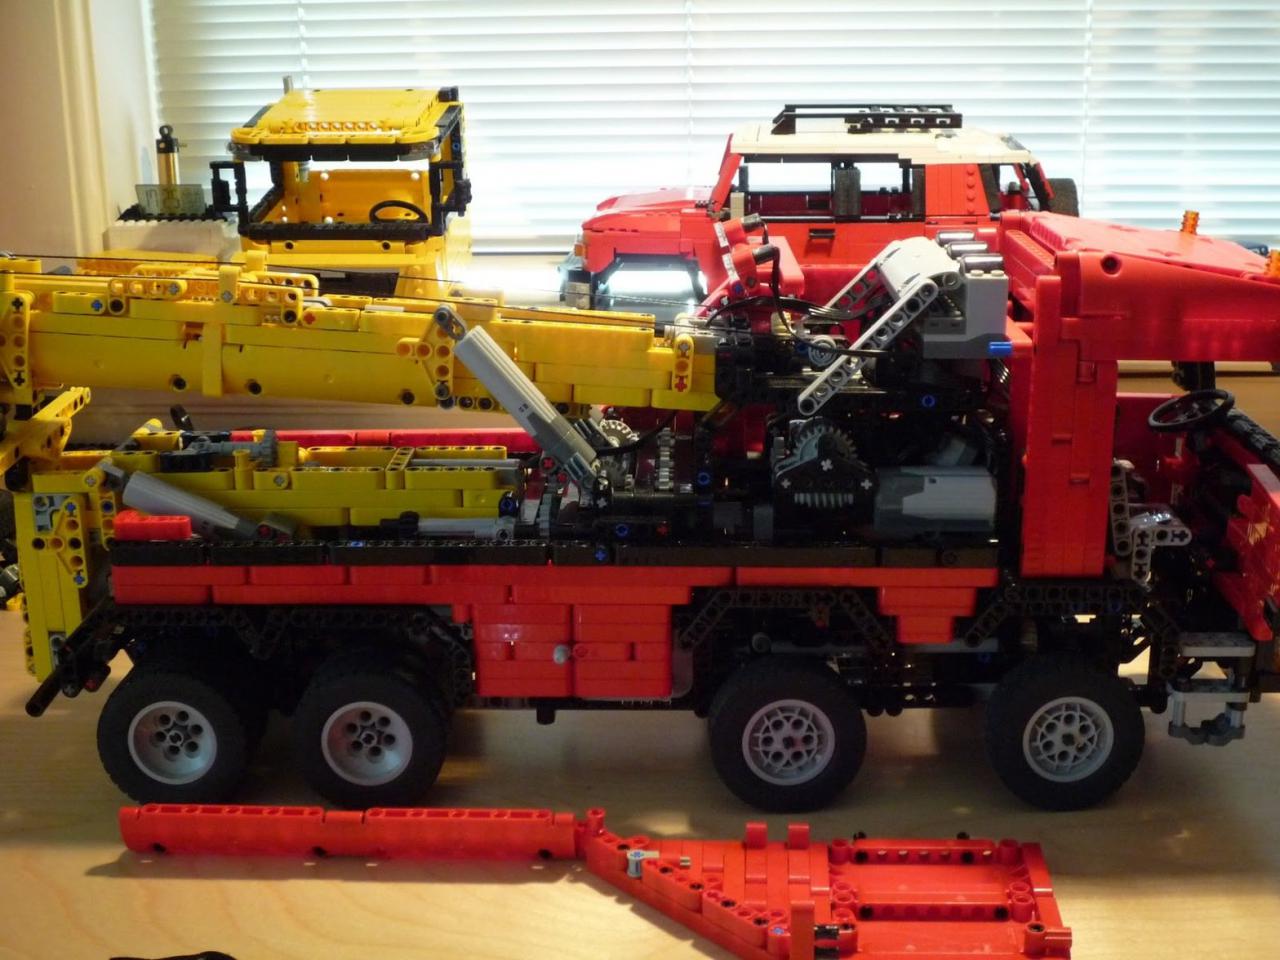 MOC-0583 Scania 8x8 Extreme tow truck by JaapTechnic